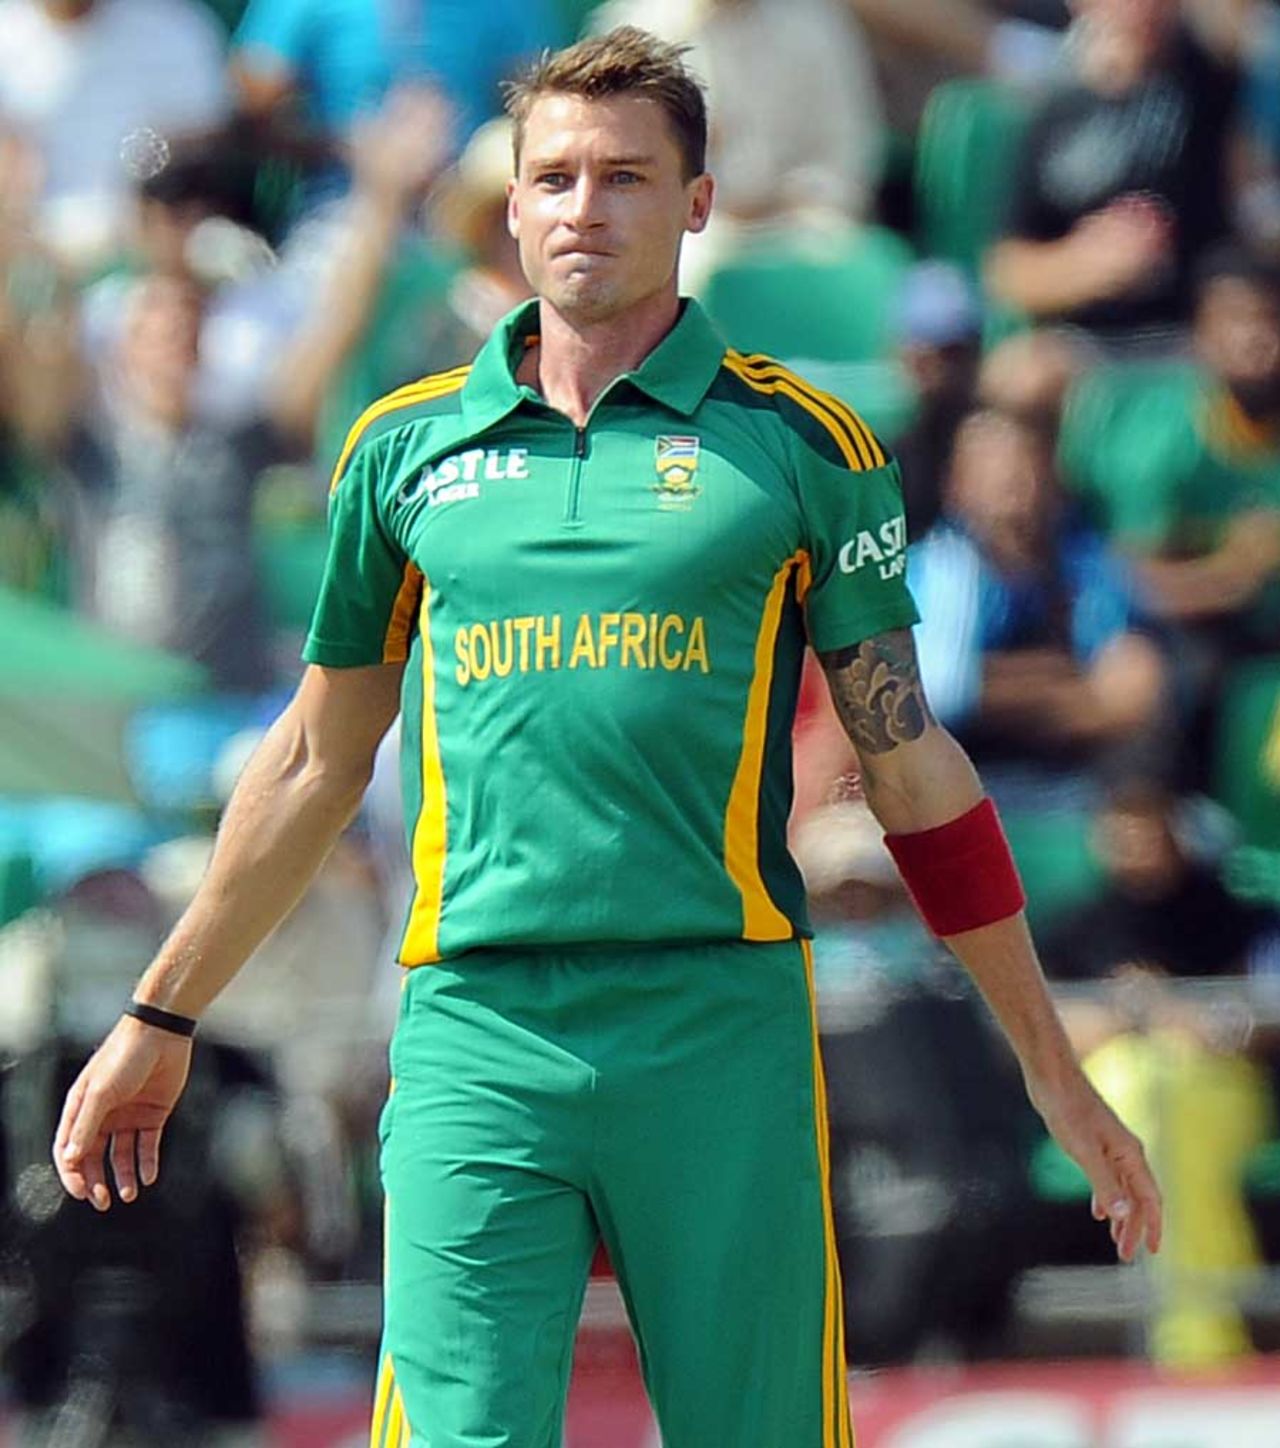 Dale Steyn dismissed Mohammad Hafeez for the sixth time on the tour, South Africa v Pakistan, 5th ODI, Benoni, March 24, 2013